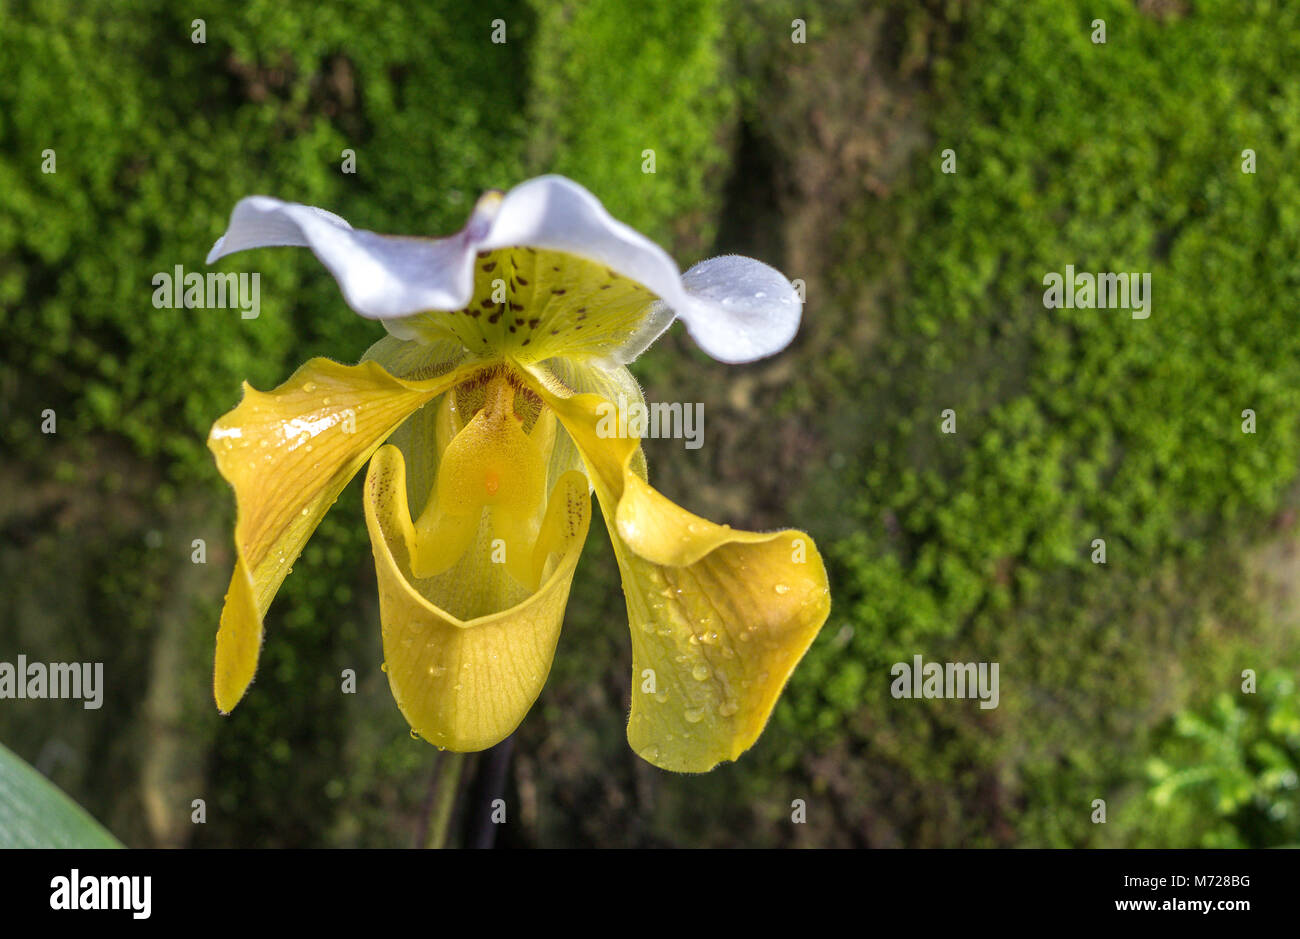 Paphiopedilum gratrixianum or slipper Orchid is a species of plant in the Orchidaceae family found from Laos to Vietnam Stock Photo